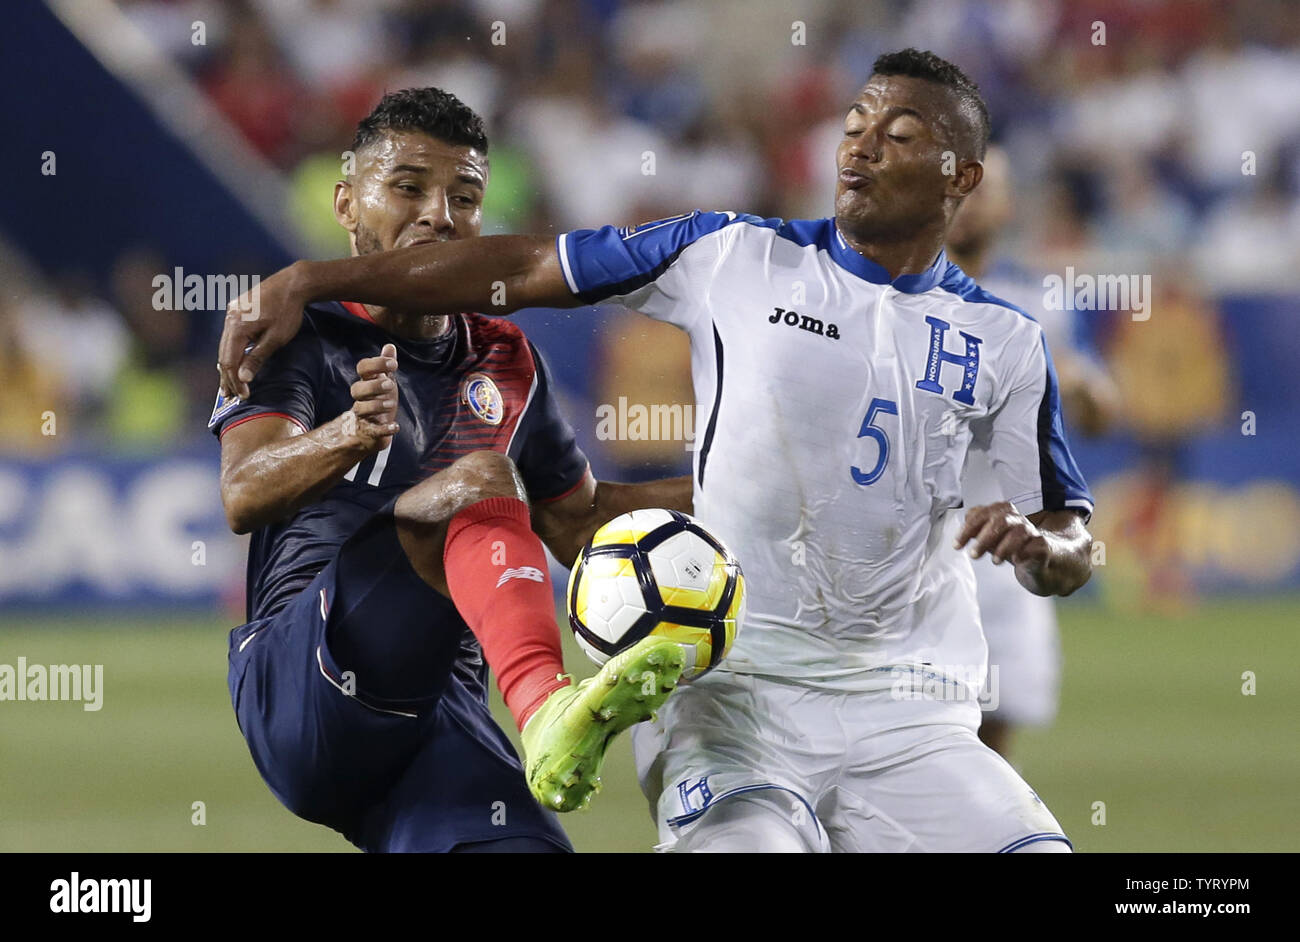 Costa Rica Johan Venegas and Honduras Ever Alvarado in the first half at  the Concacaf Gold Cup 2017 at Red Bull Arena in Harrison New Jersey on July  7, 2017. Photo by